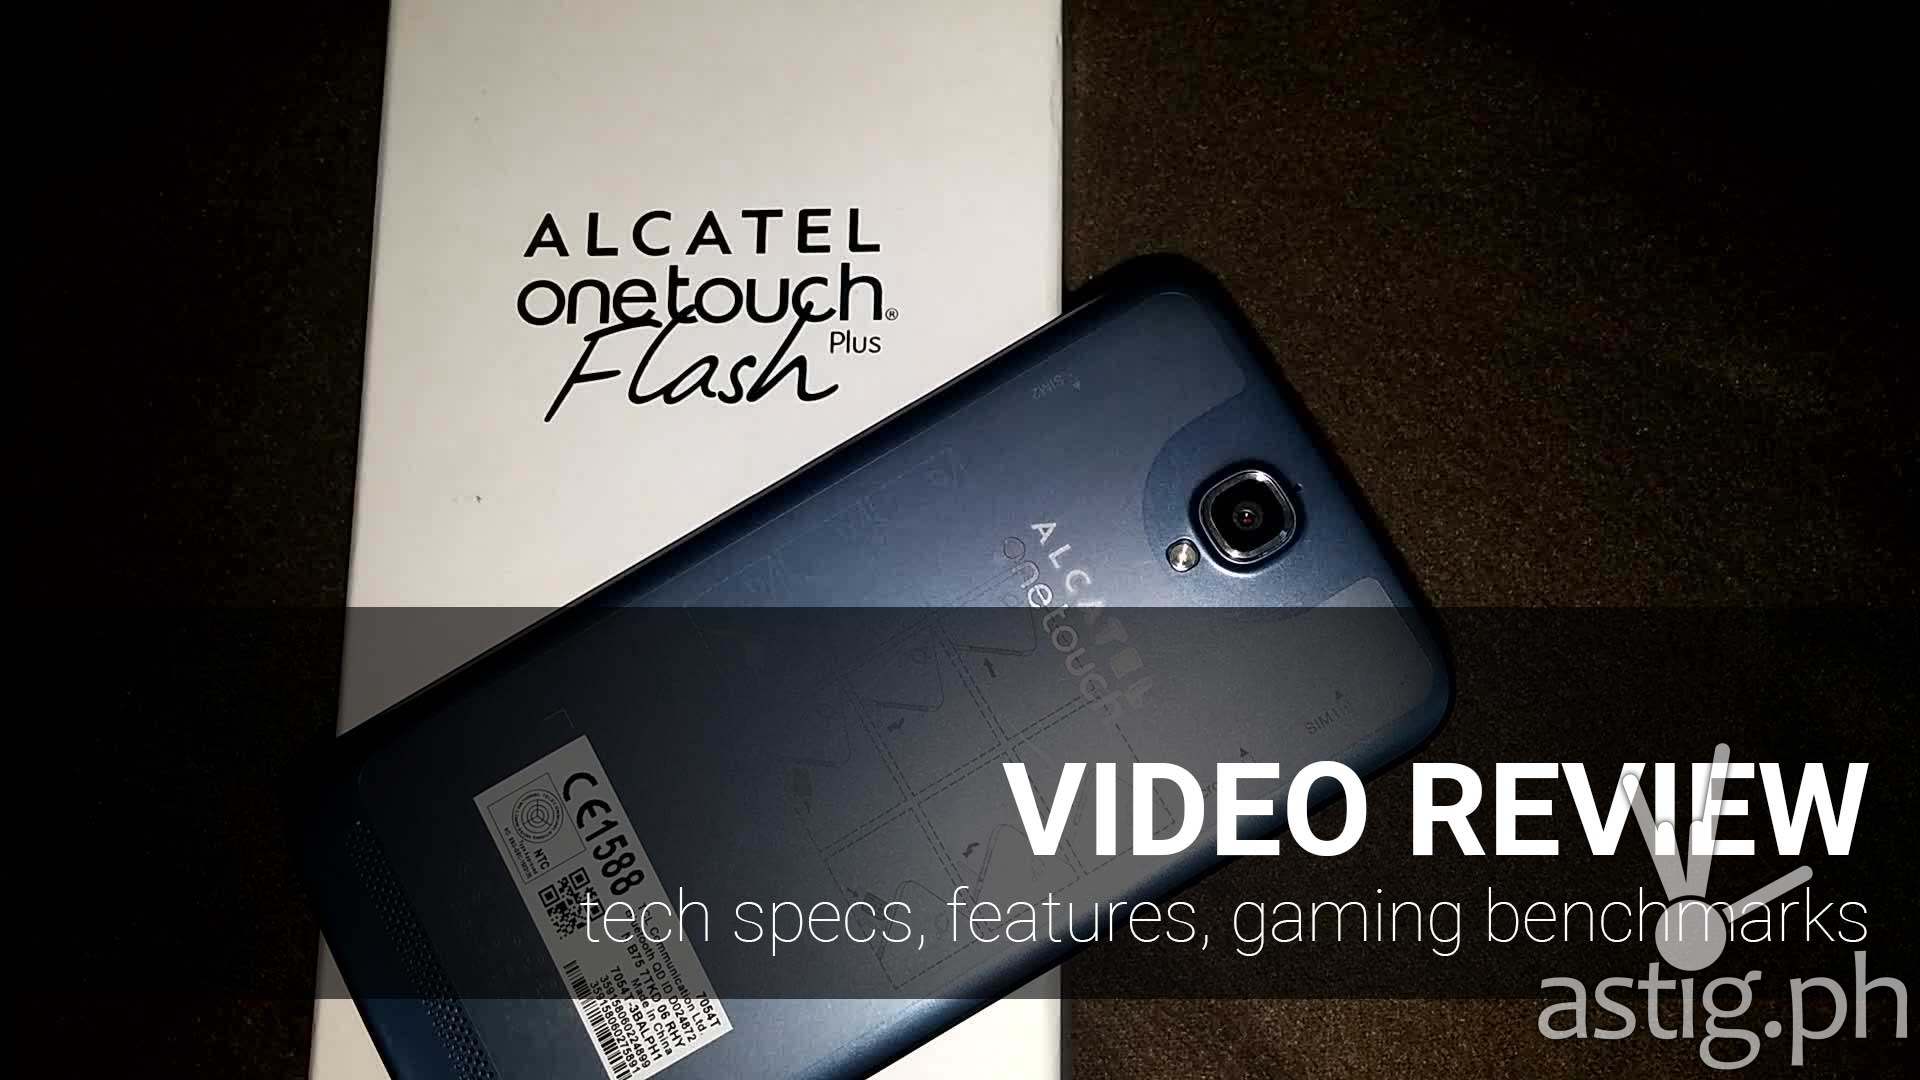 Alcatel ONETOUCH Flash Plus review video